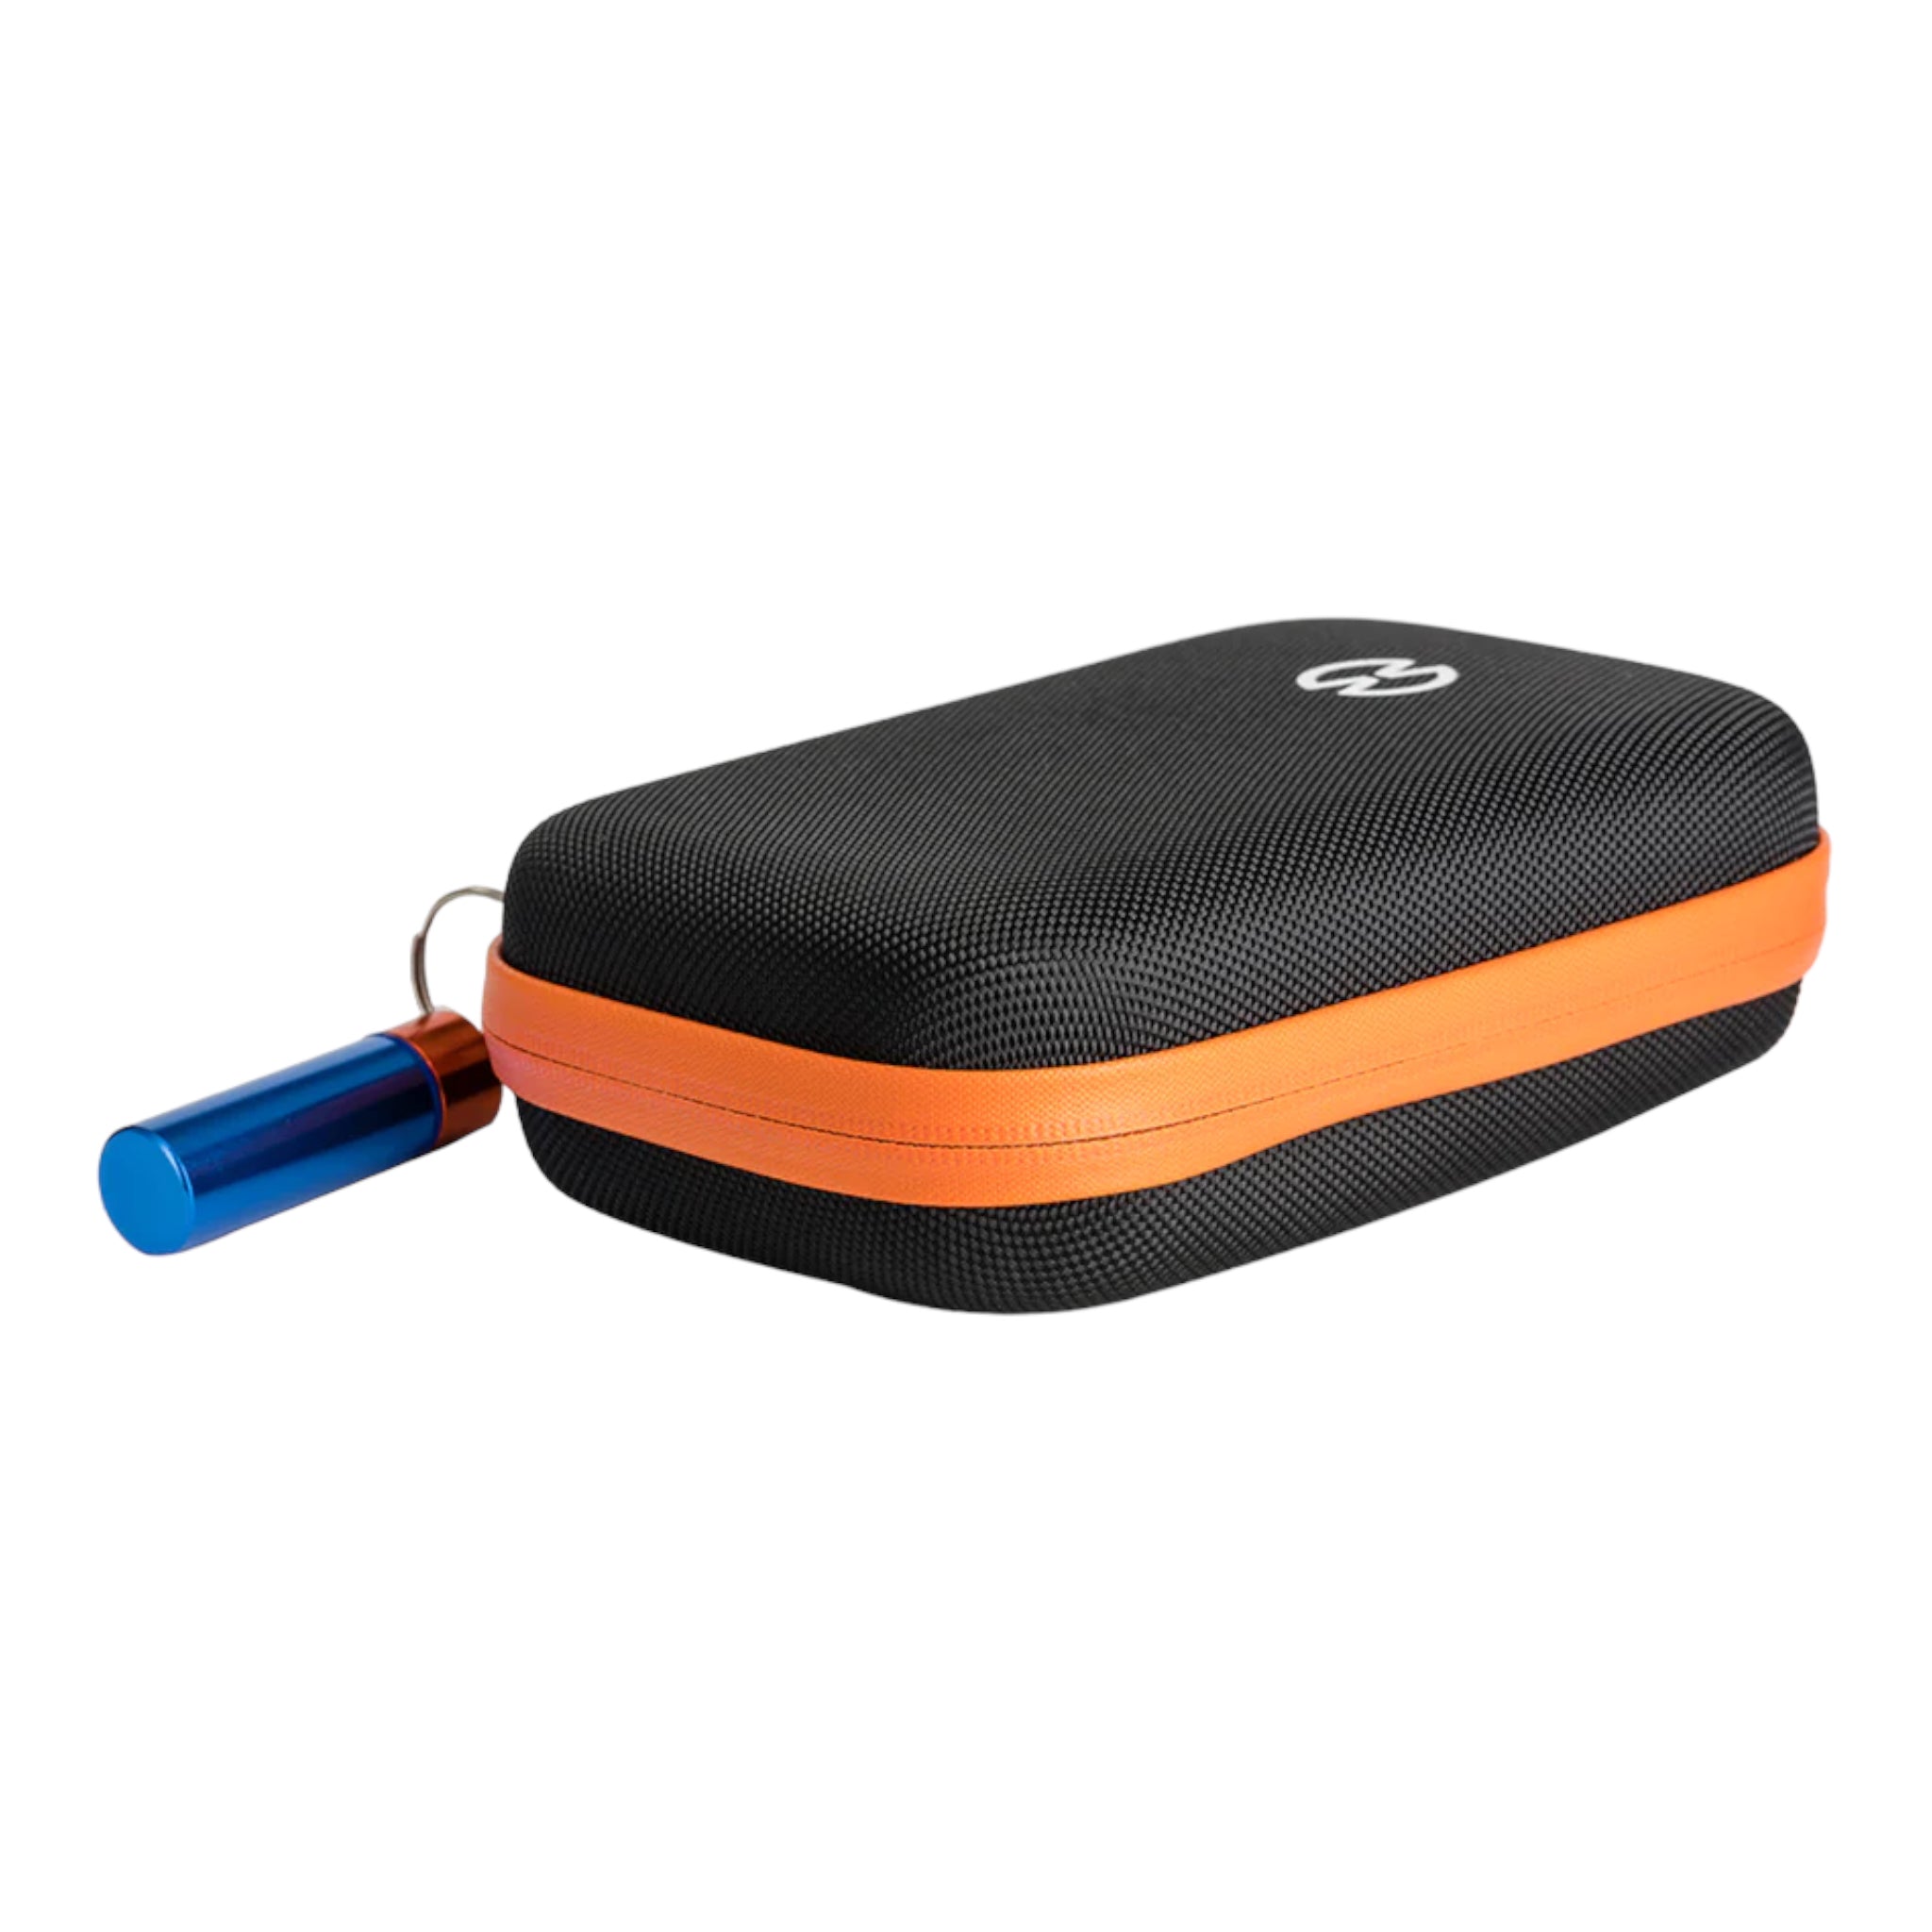 smell proof Storz And Bickel - Mighty+ Carrying Case